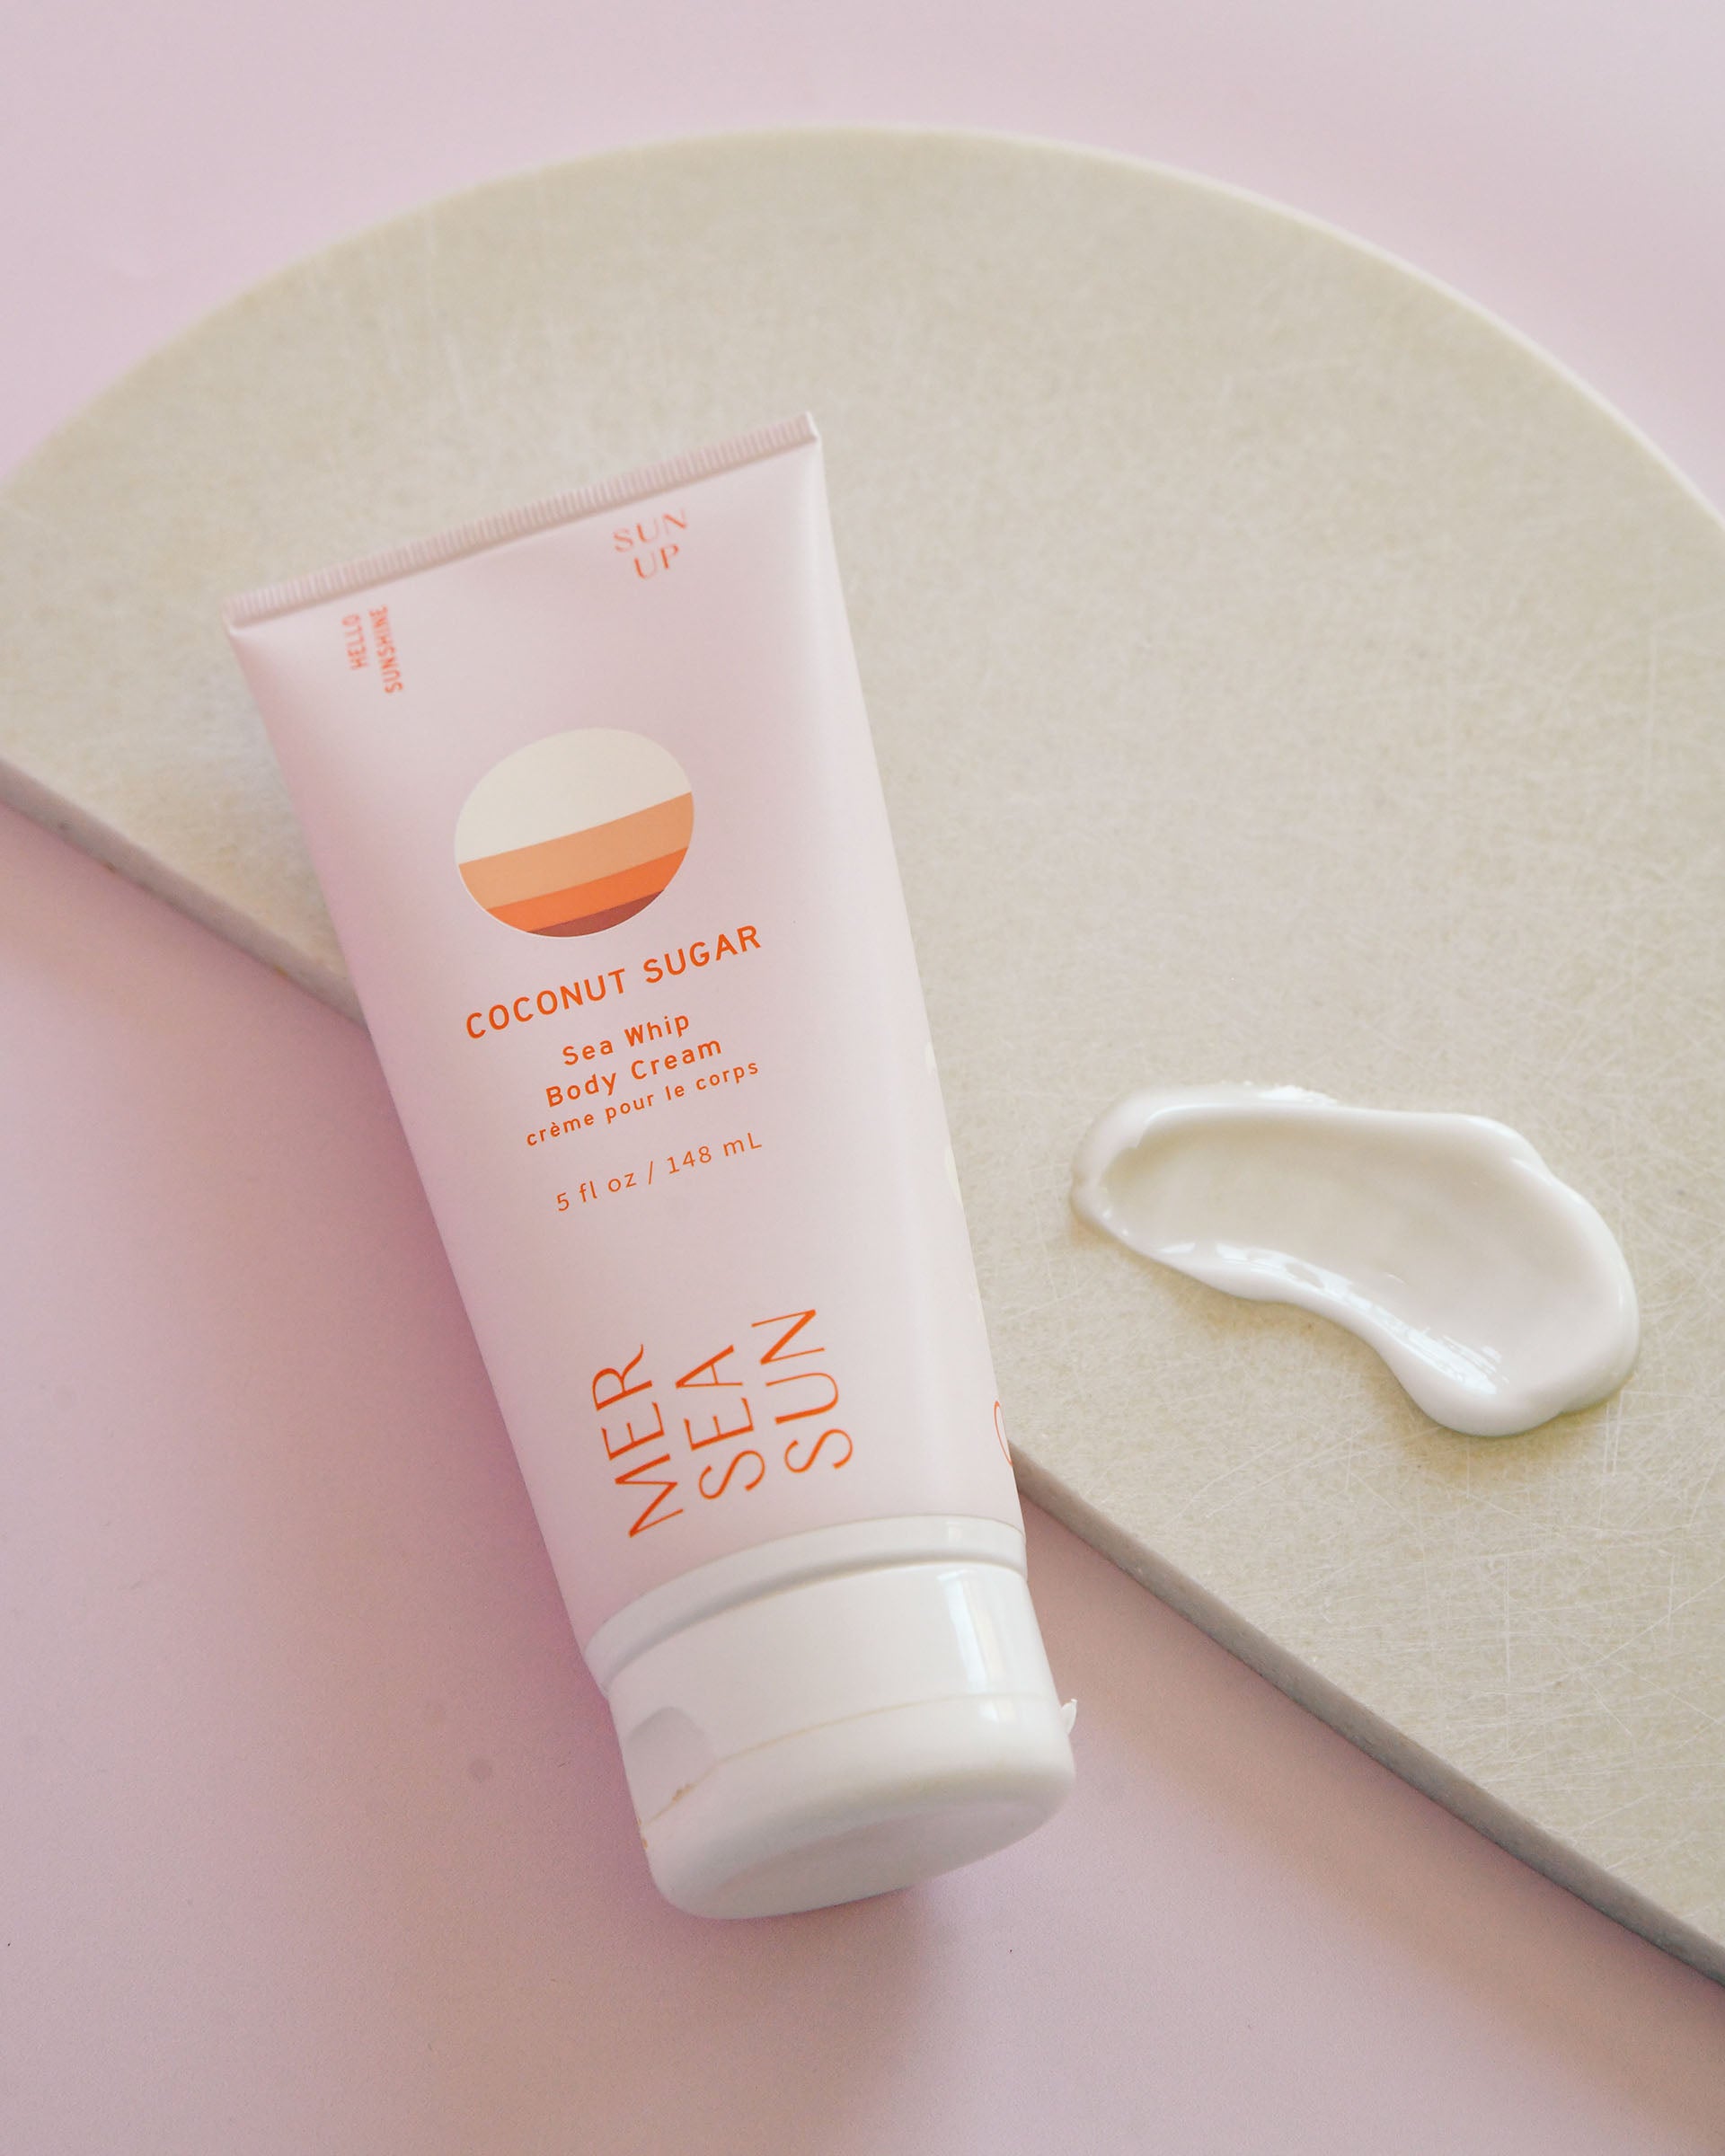 Coconut Sugar Sea Whip Body Cream MERSEA Sun. Pink and orange tube in front of pink background.